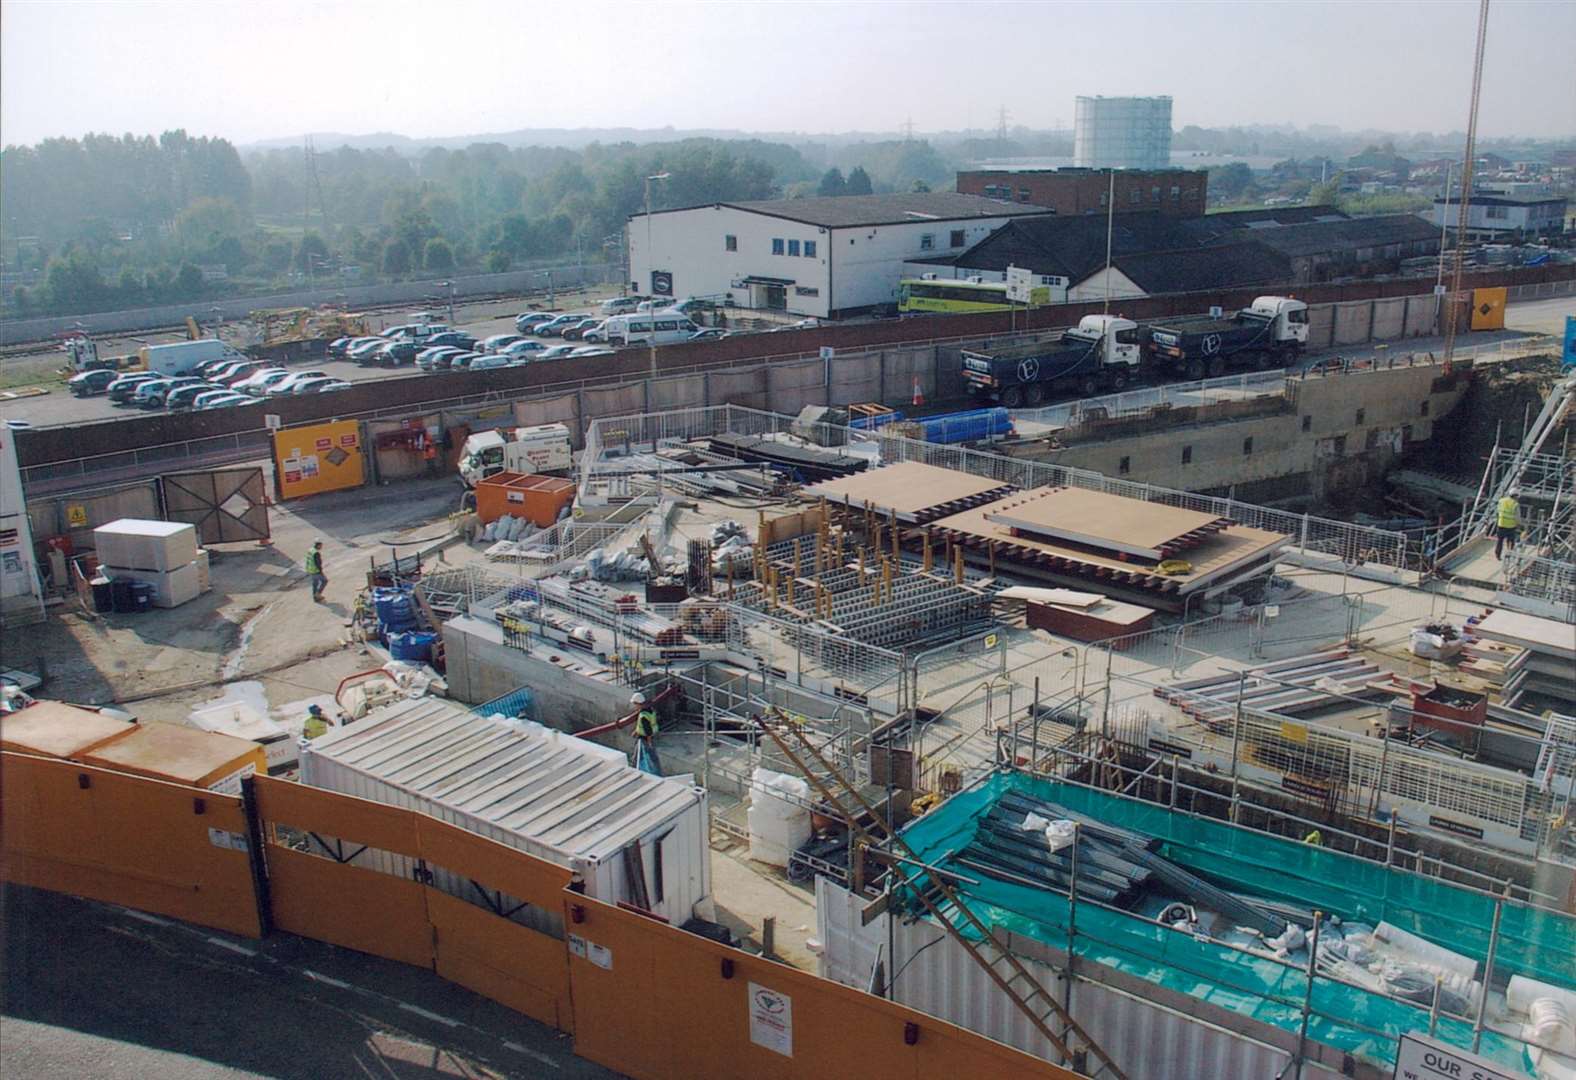 Construction of the County Square extension together with its basement service area and car park is well under way in this view from 2006. Picture: Steve Salter